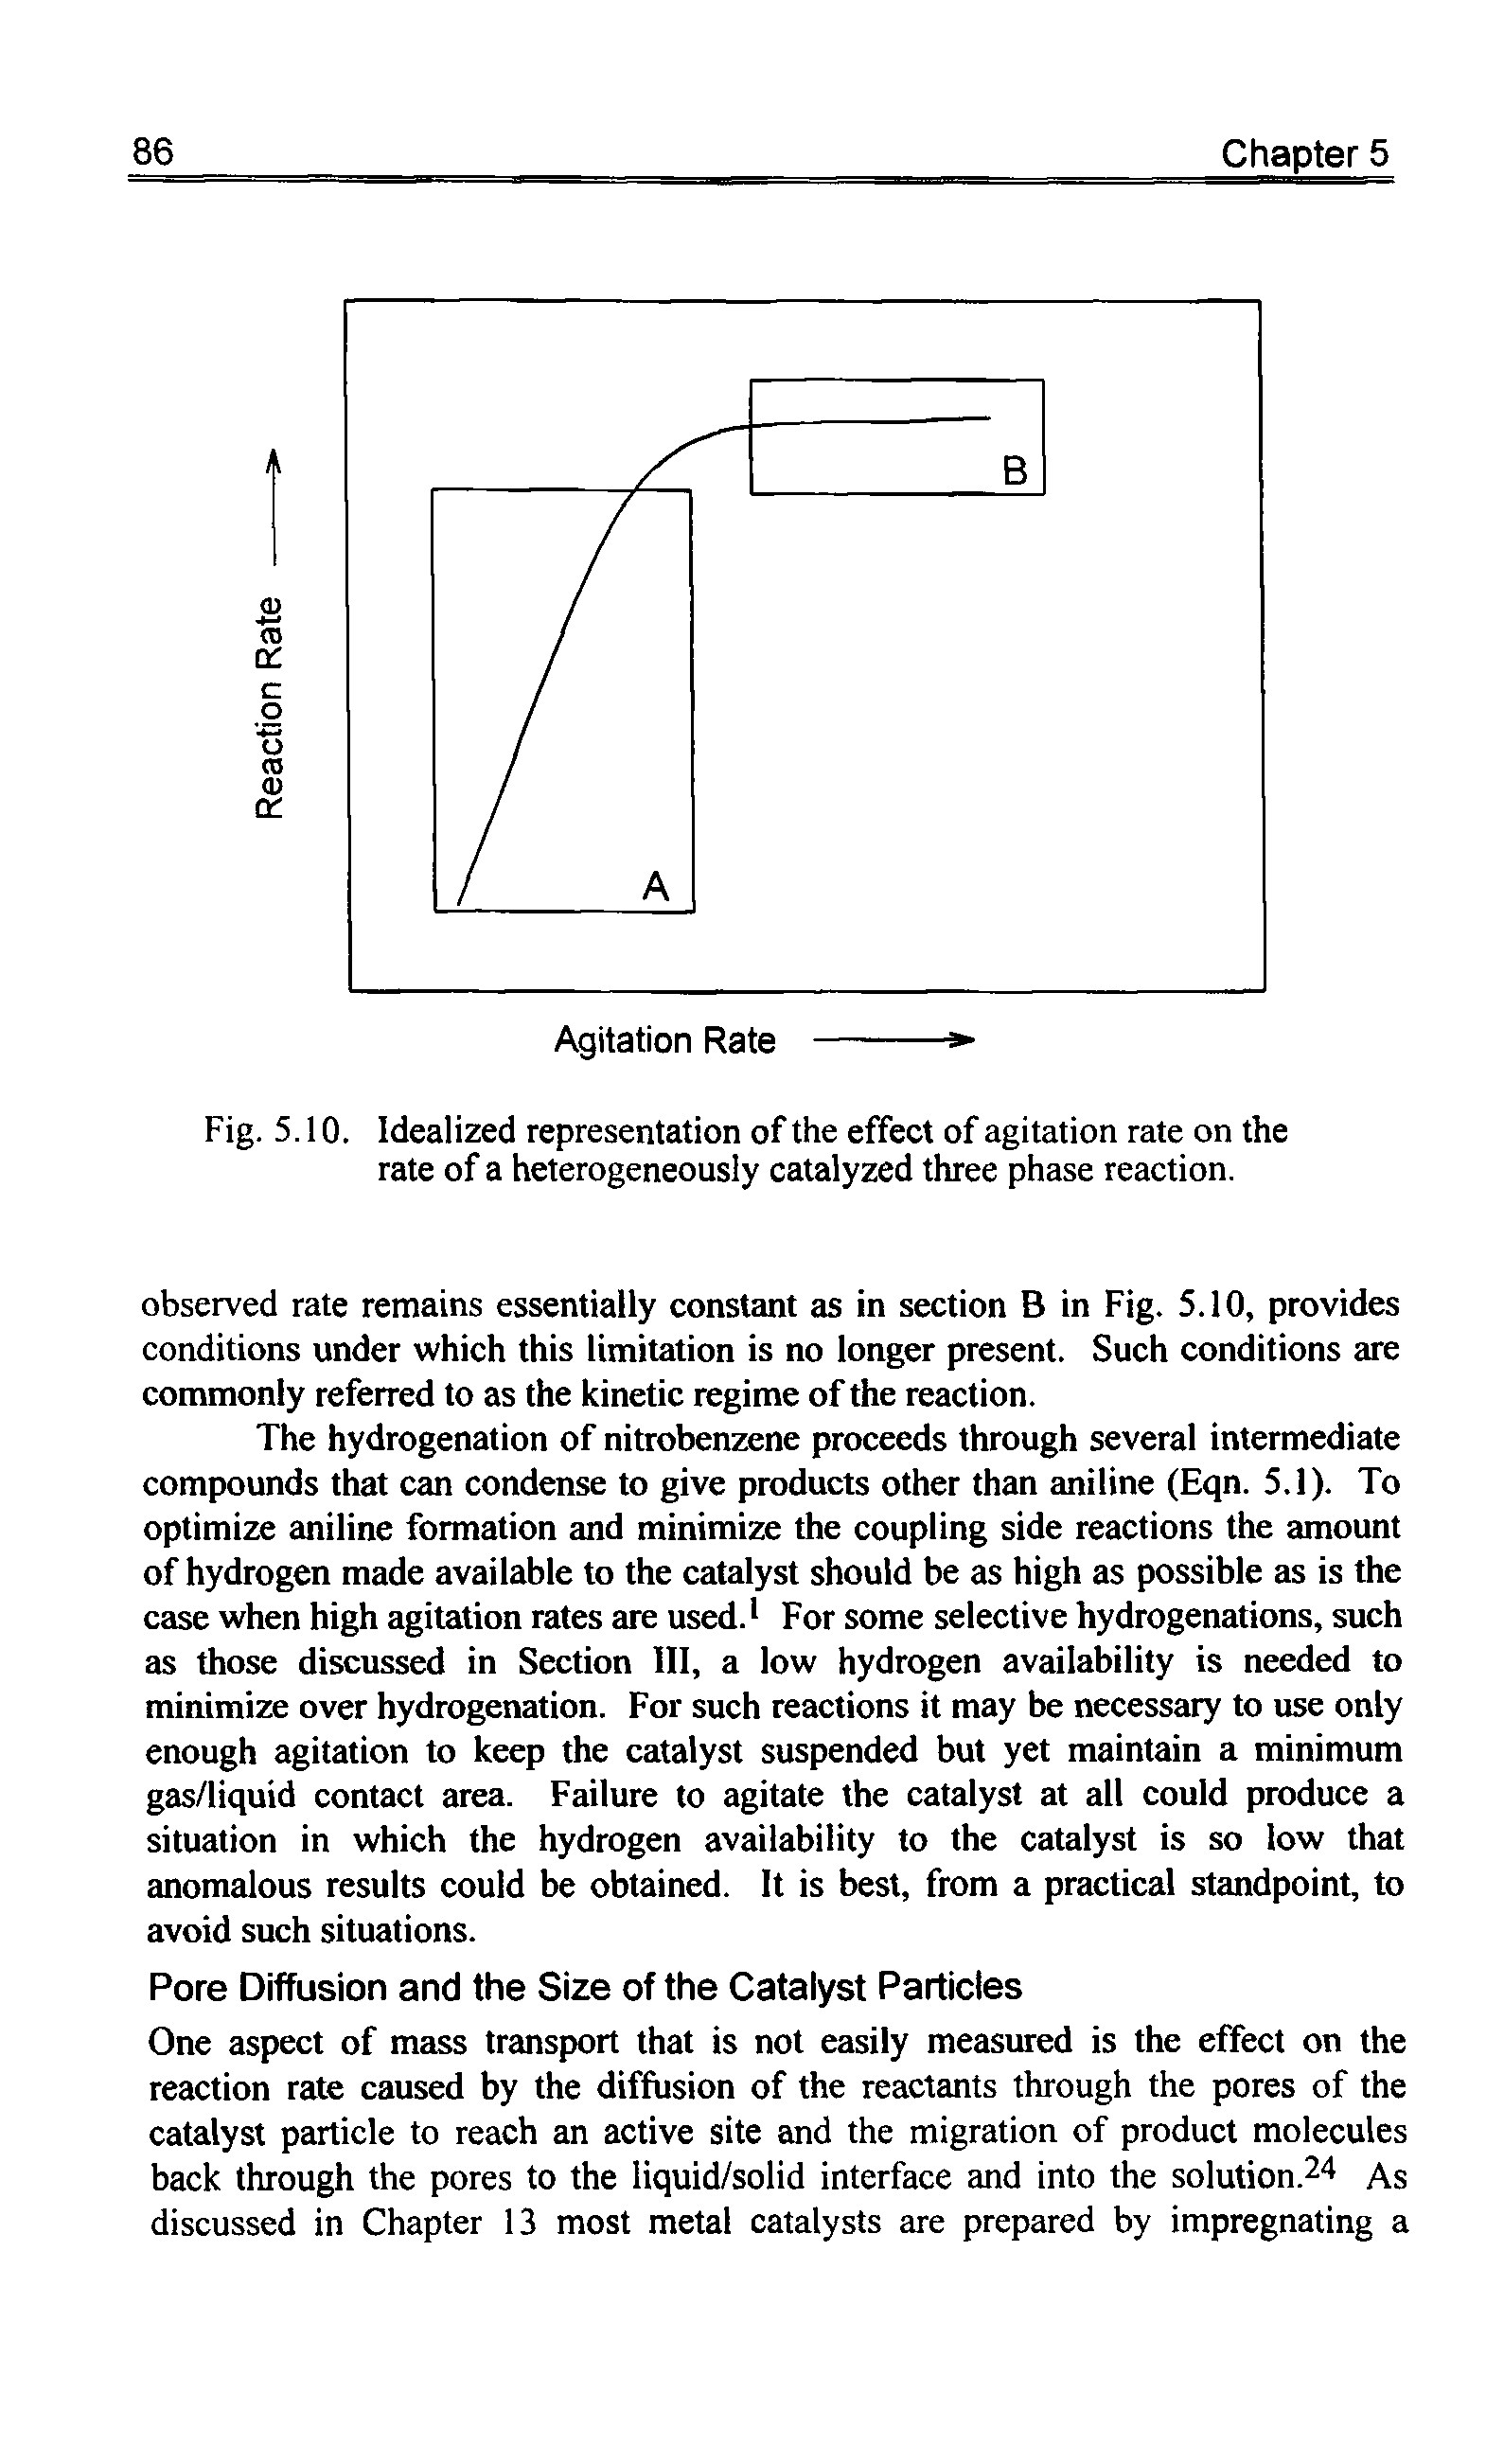 Fig. 5.10. Idealized representation of the effect of agitation rate on the rate of a heterogeneously catalyzed three phase reaction.